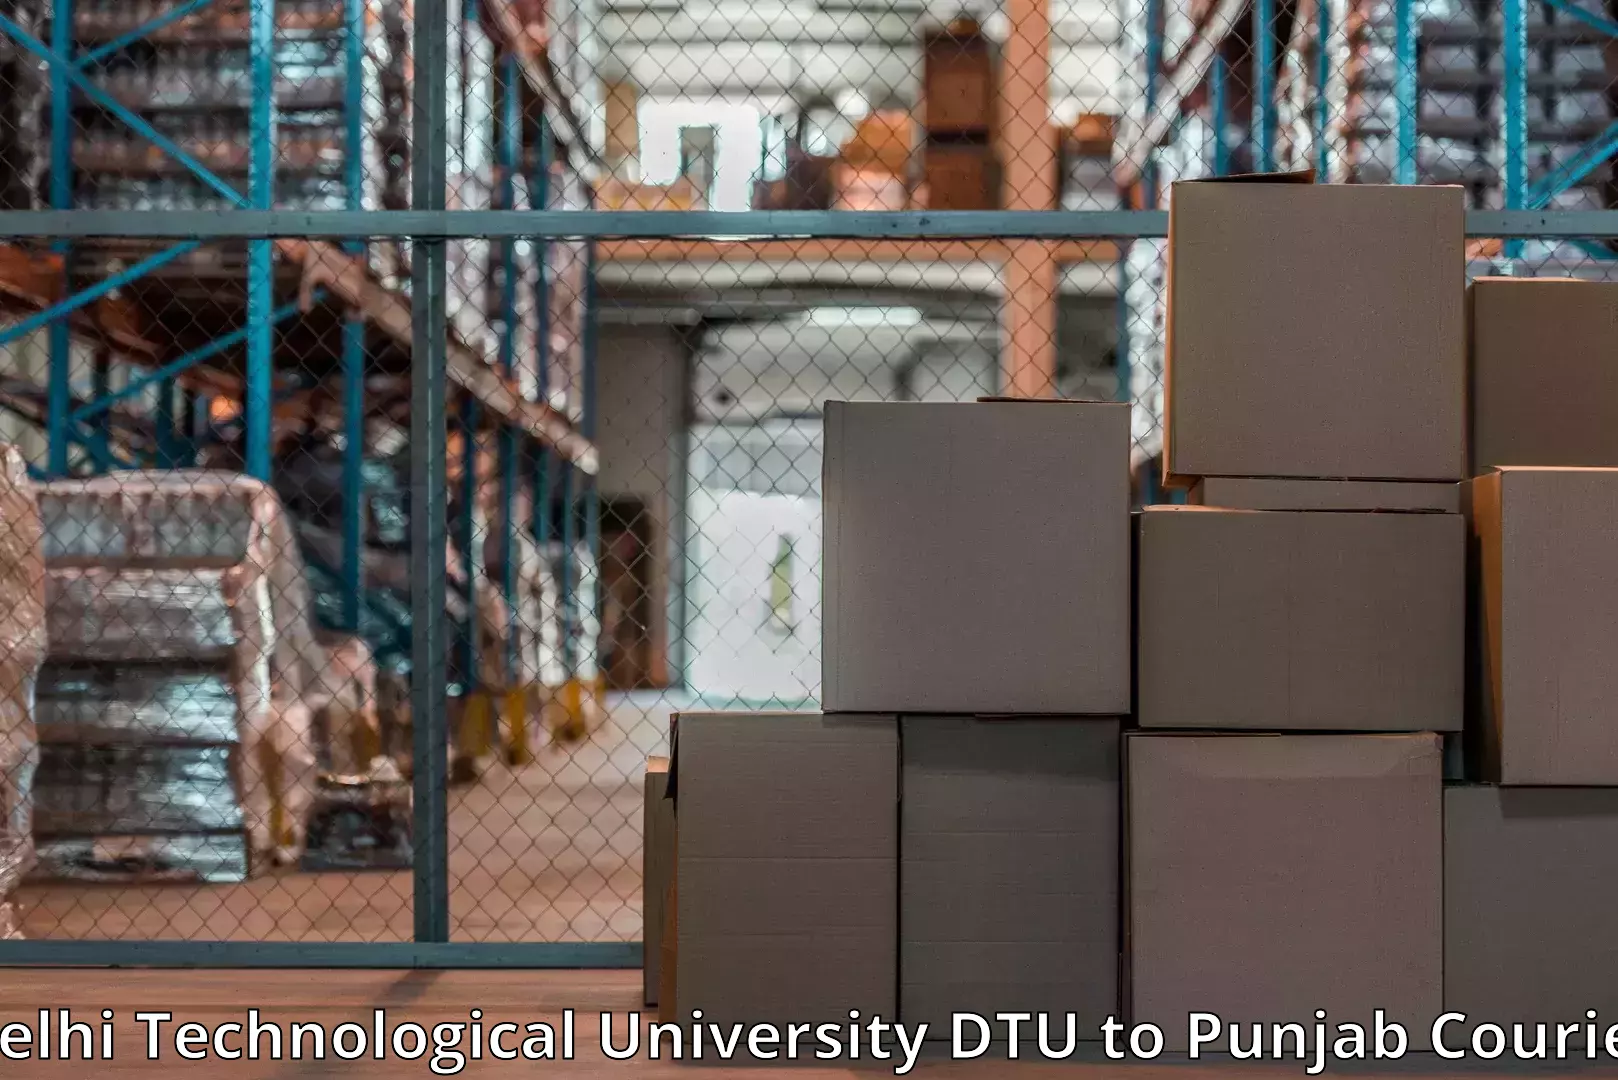 Specialized furniture movers in Delhi Technological University DTU to Samana